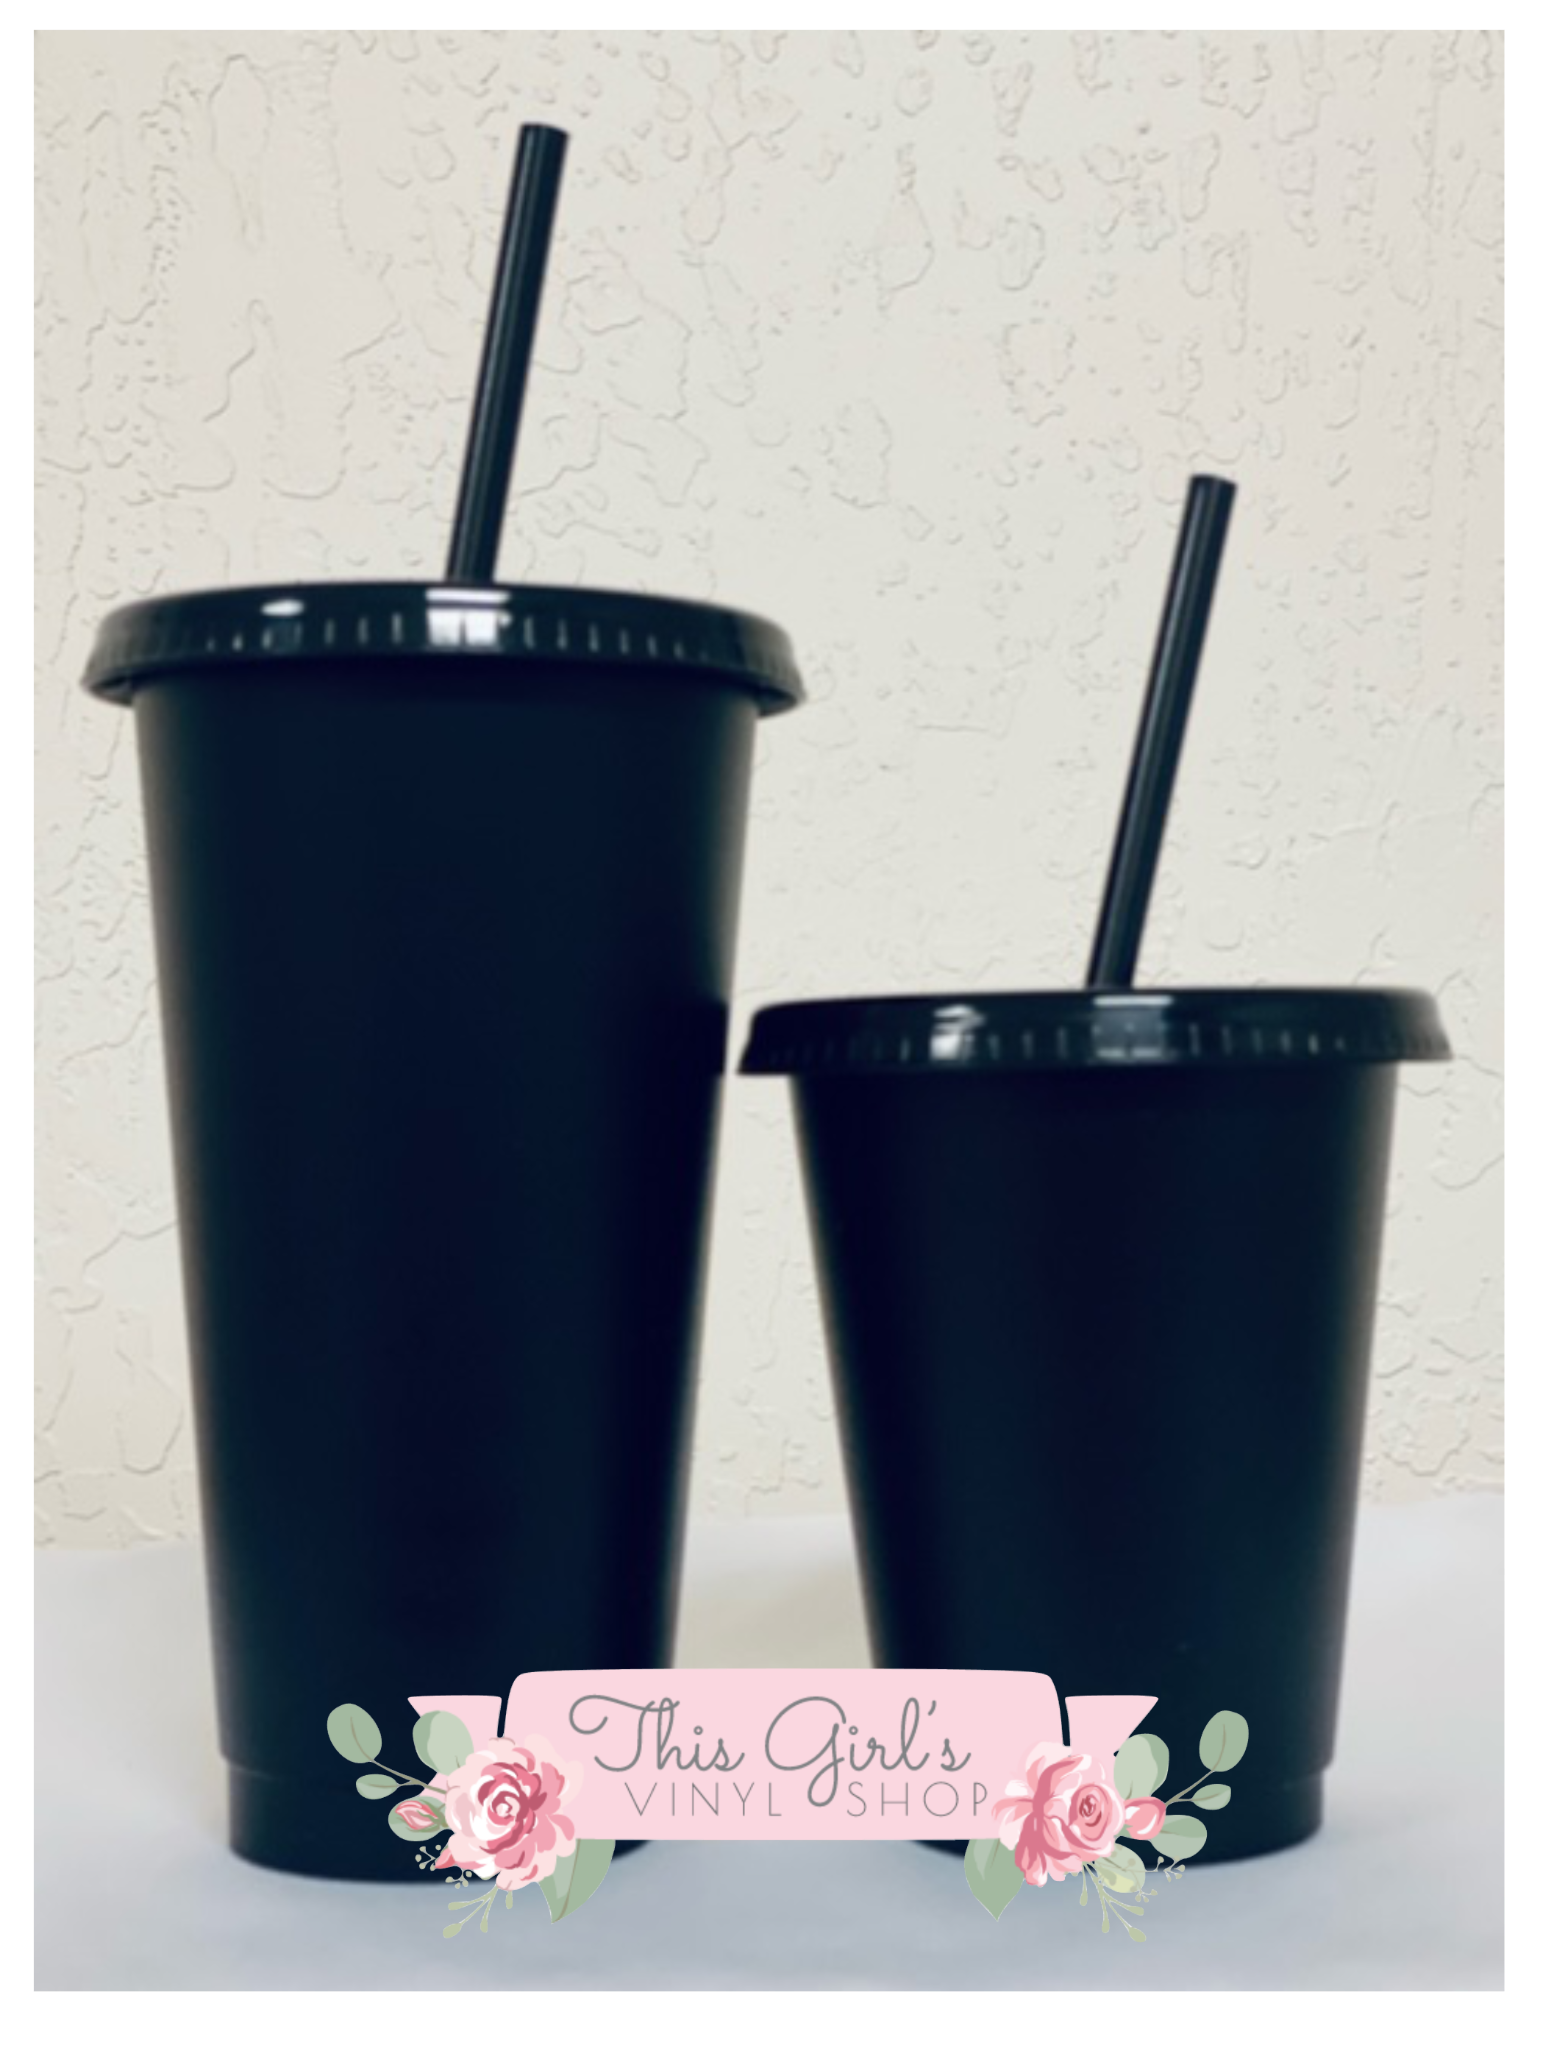 Glitter Plastic Cups with Straws and Lid,5 Packs 24 oz. Colorful Glitter  Reusable Cups ,Elegant Plastic Party Cups Wedding Decorations,Summer Coffee